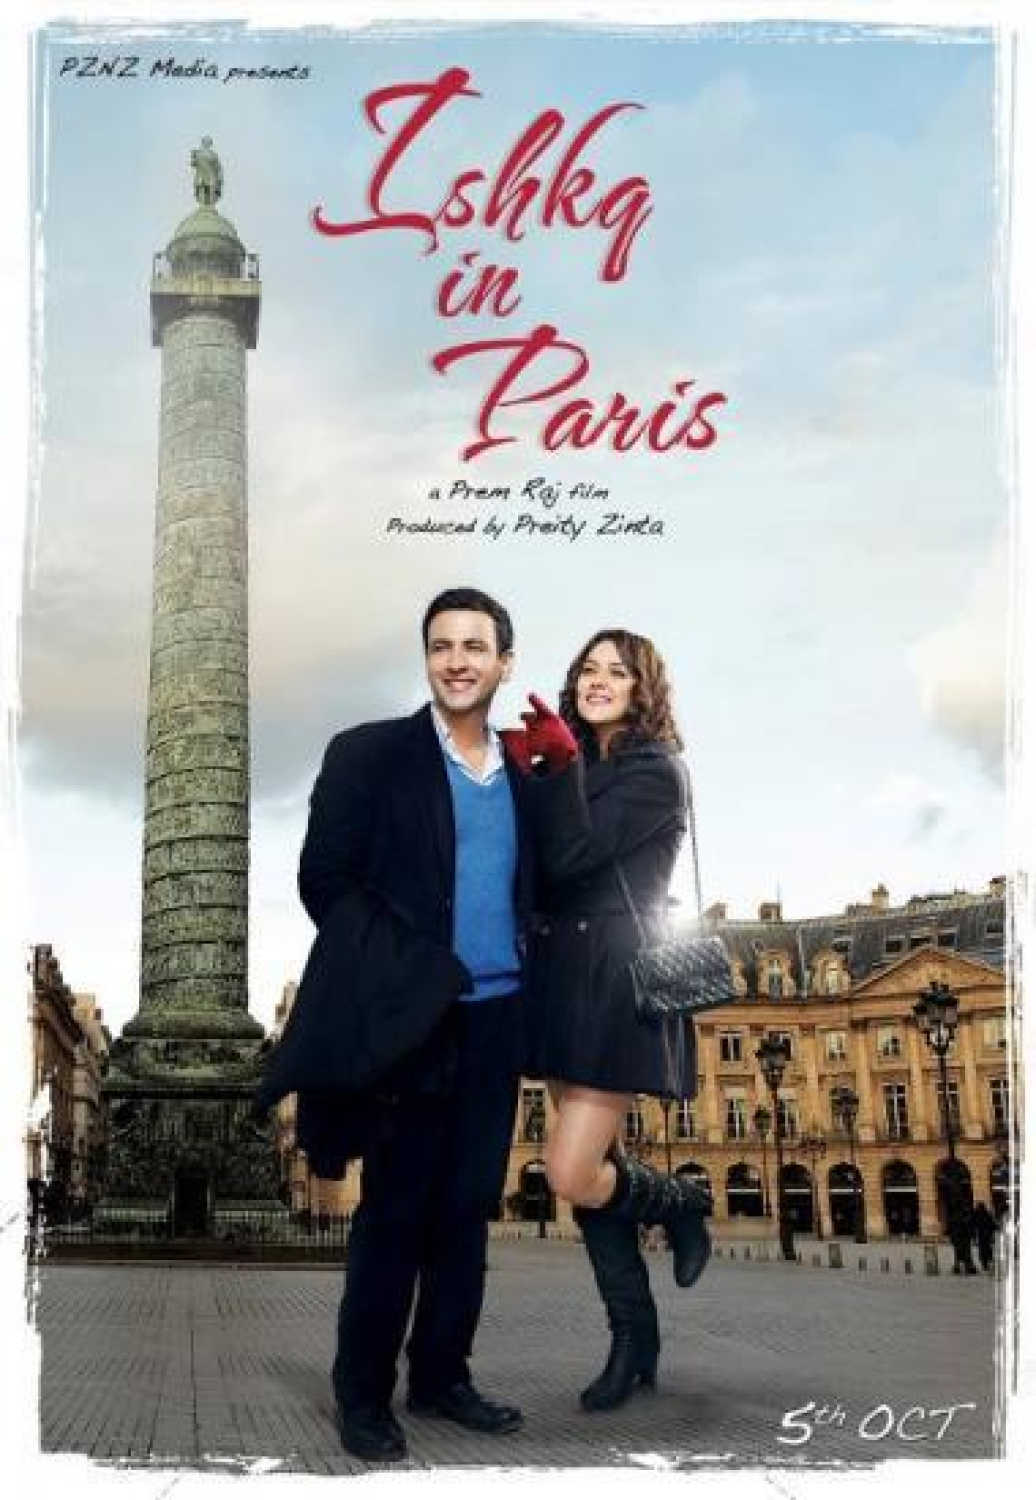 Which Hollywood actress did appear in Bollywood movie, Ishkq in Paris (2013)?